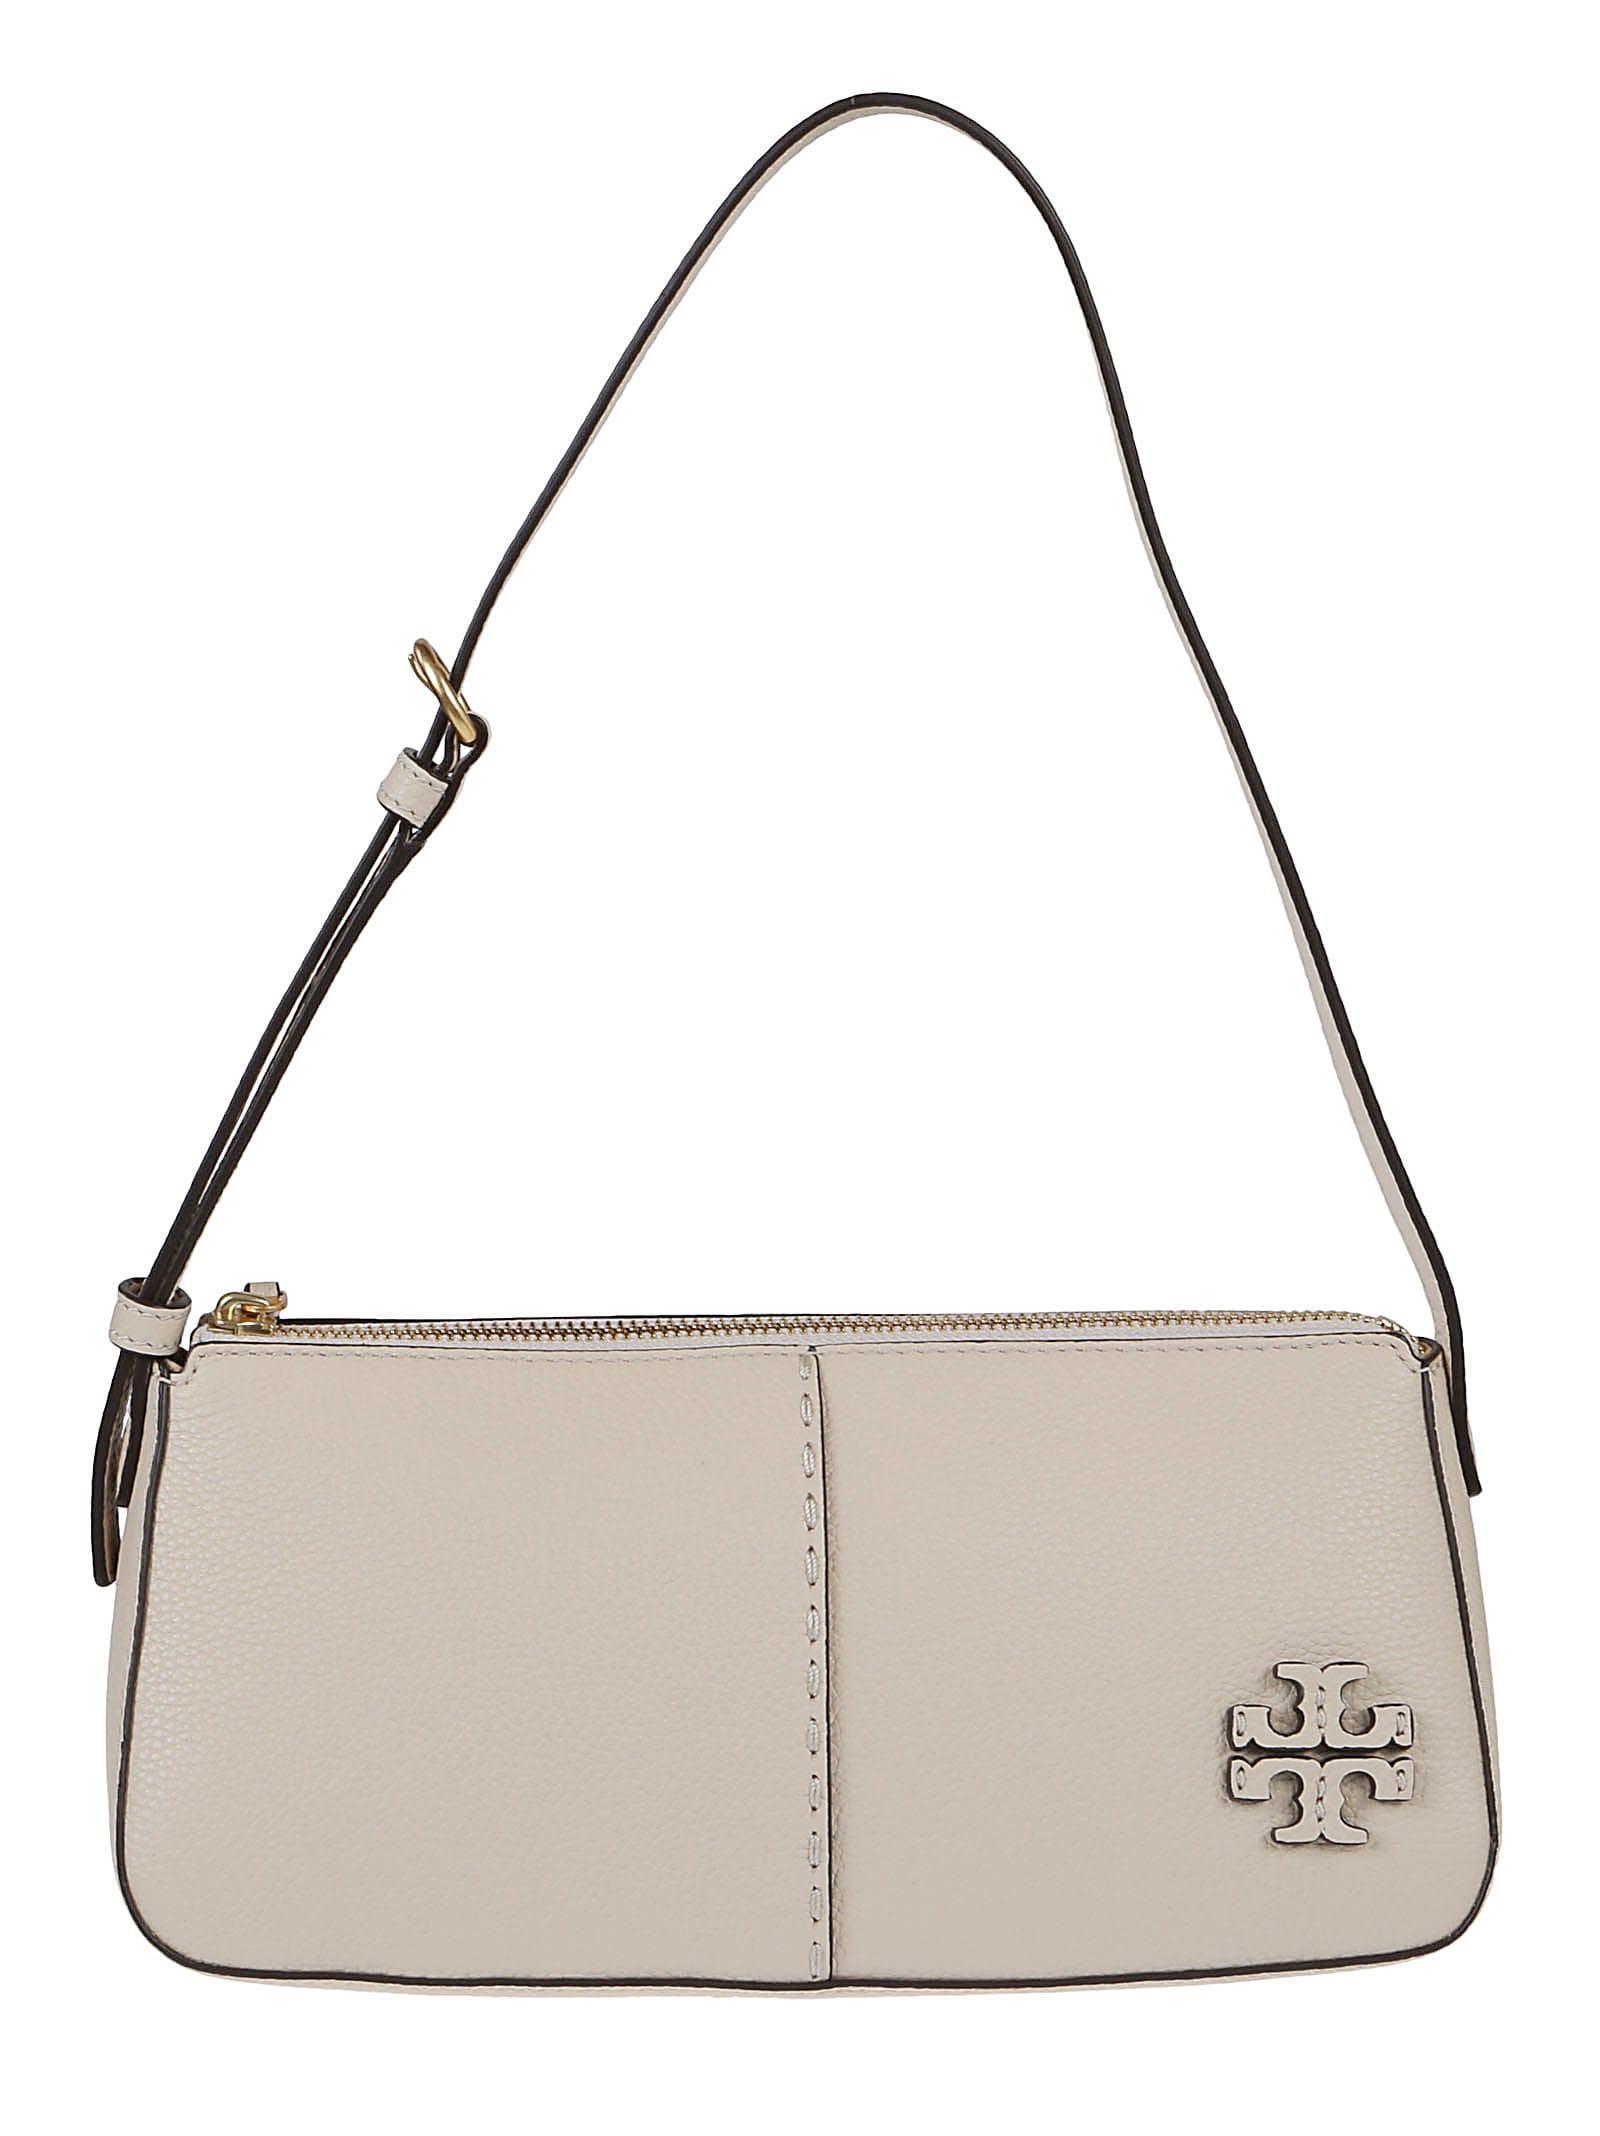 Tory Burch Mcgraw Wedge Zipped Shoulder Bag in White | Lyst